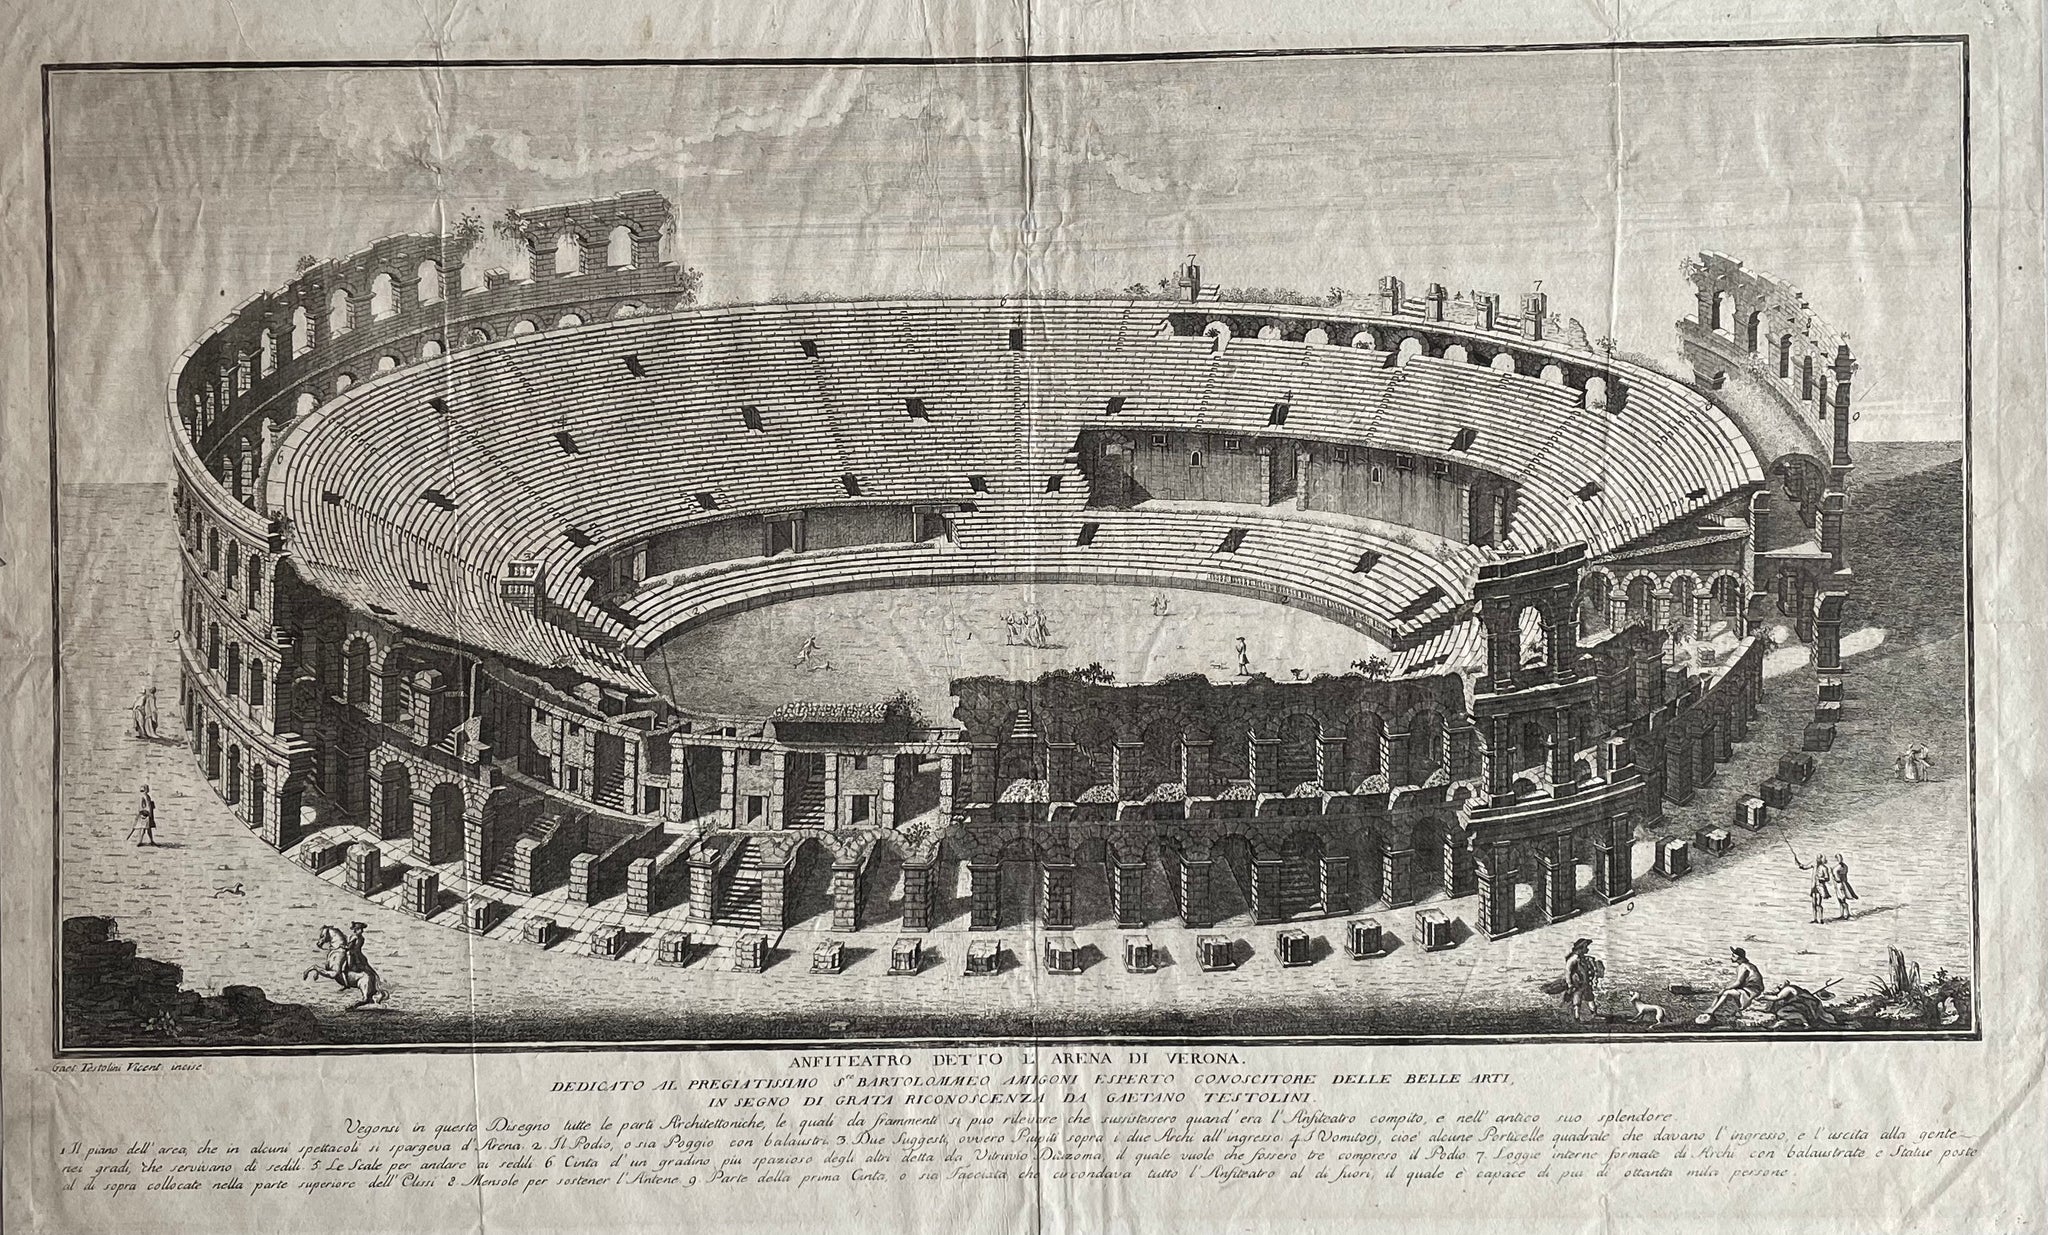 Verona. - "Anfiteatro detto L'Arena di Verona"  The antique theater in Verona  called "Arena"  Copper etching by Gaetano Testolini  The print was dedicated to Bartolom(m)eo Amigoni, who was head of the Royal Academy of Arts in Torino.By definition of dedication Amigoni was a patronizer of Testolini.  Below dedication a description of particularities of print numbered 1 through 9.  This large folio view, a bird's eye view into the interior of the arena, was published in Paris, ca. 1770 